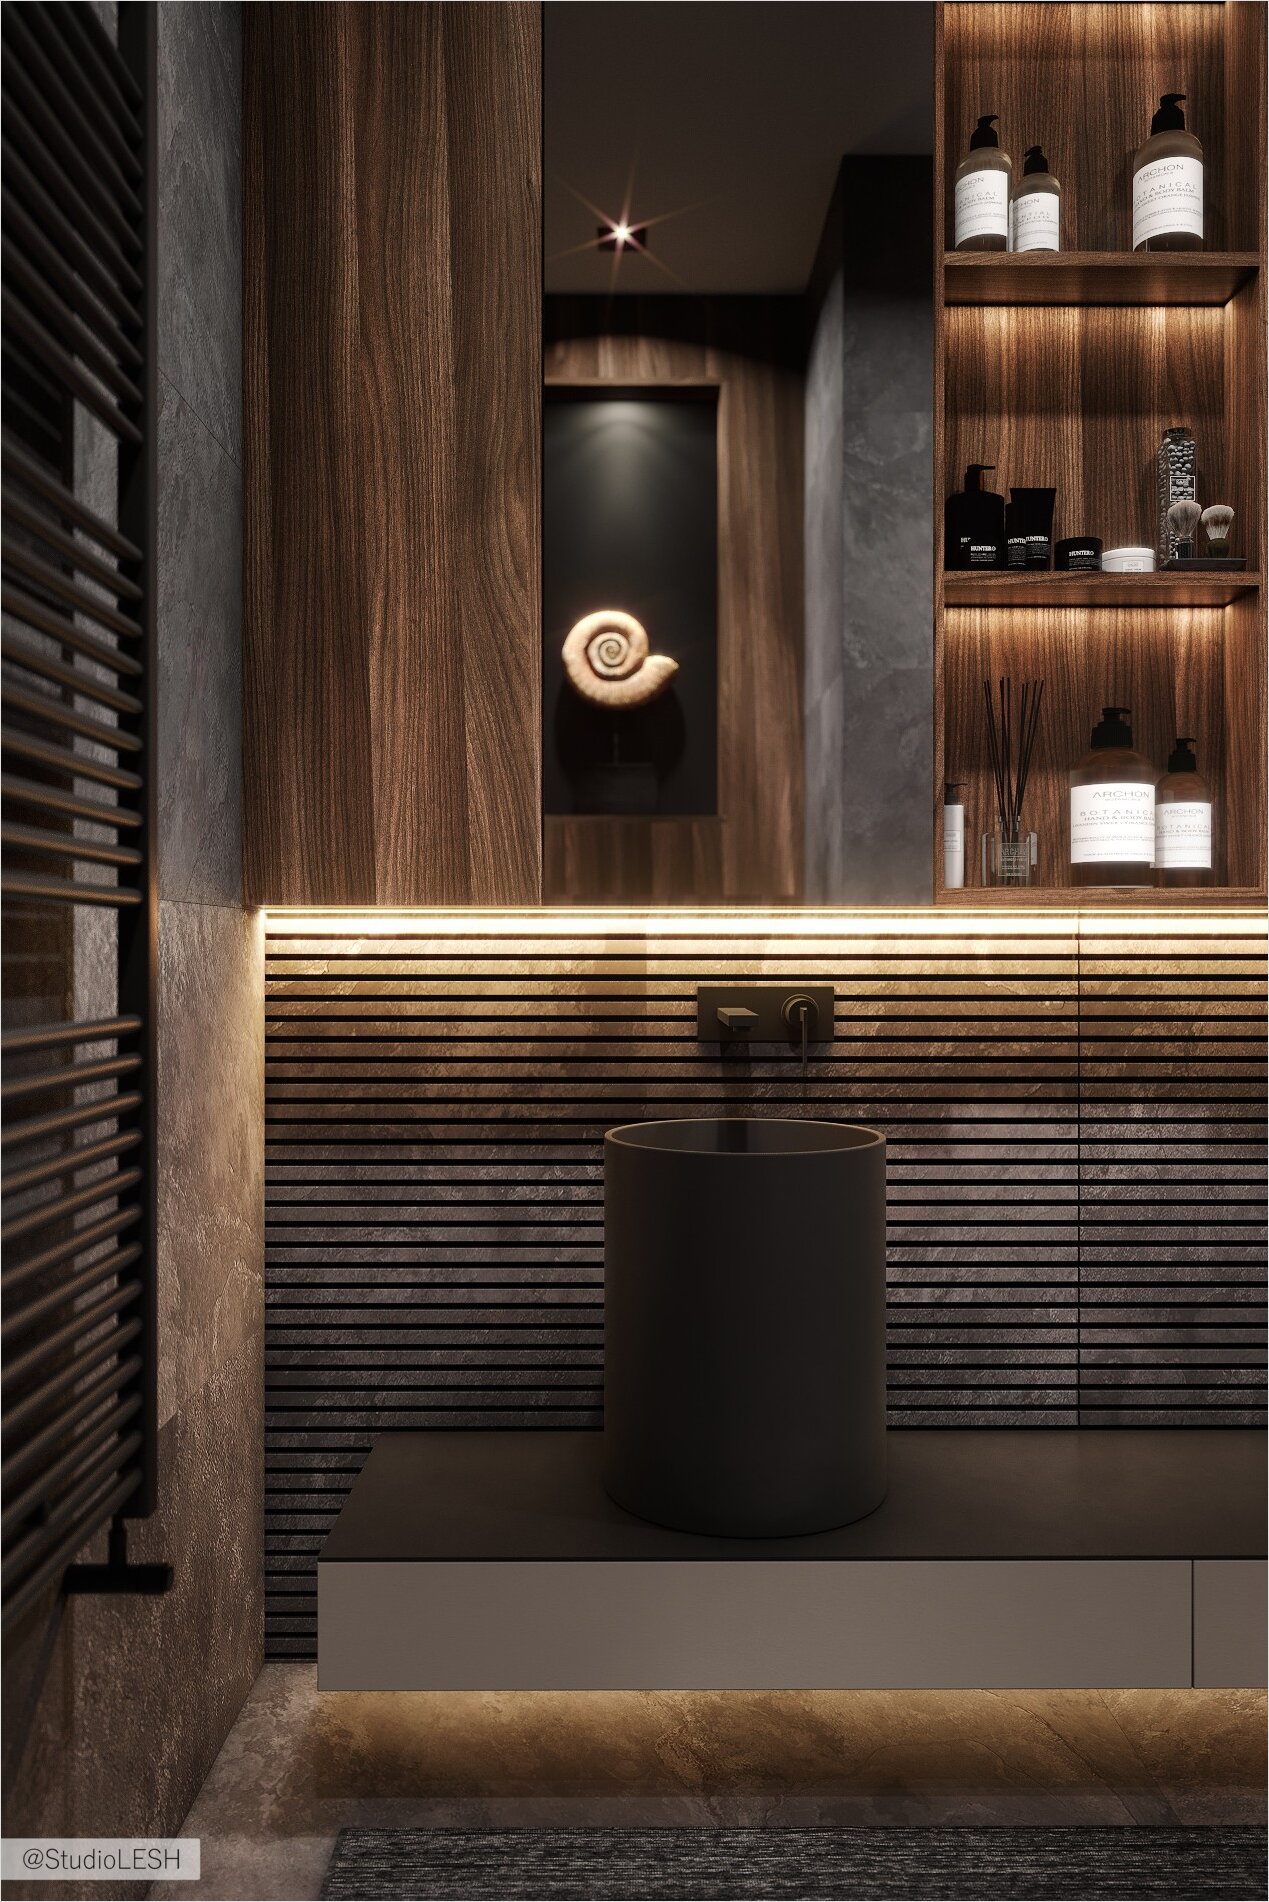 Bathroom in dark tones with a round sink on a hanging cabinet